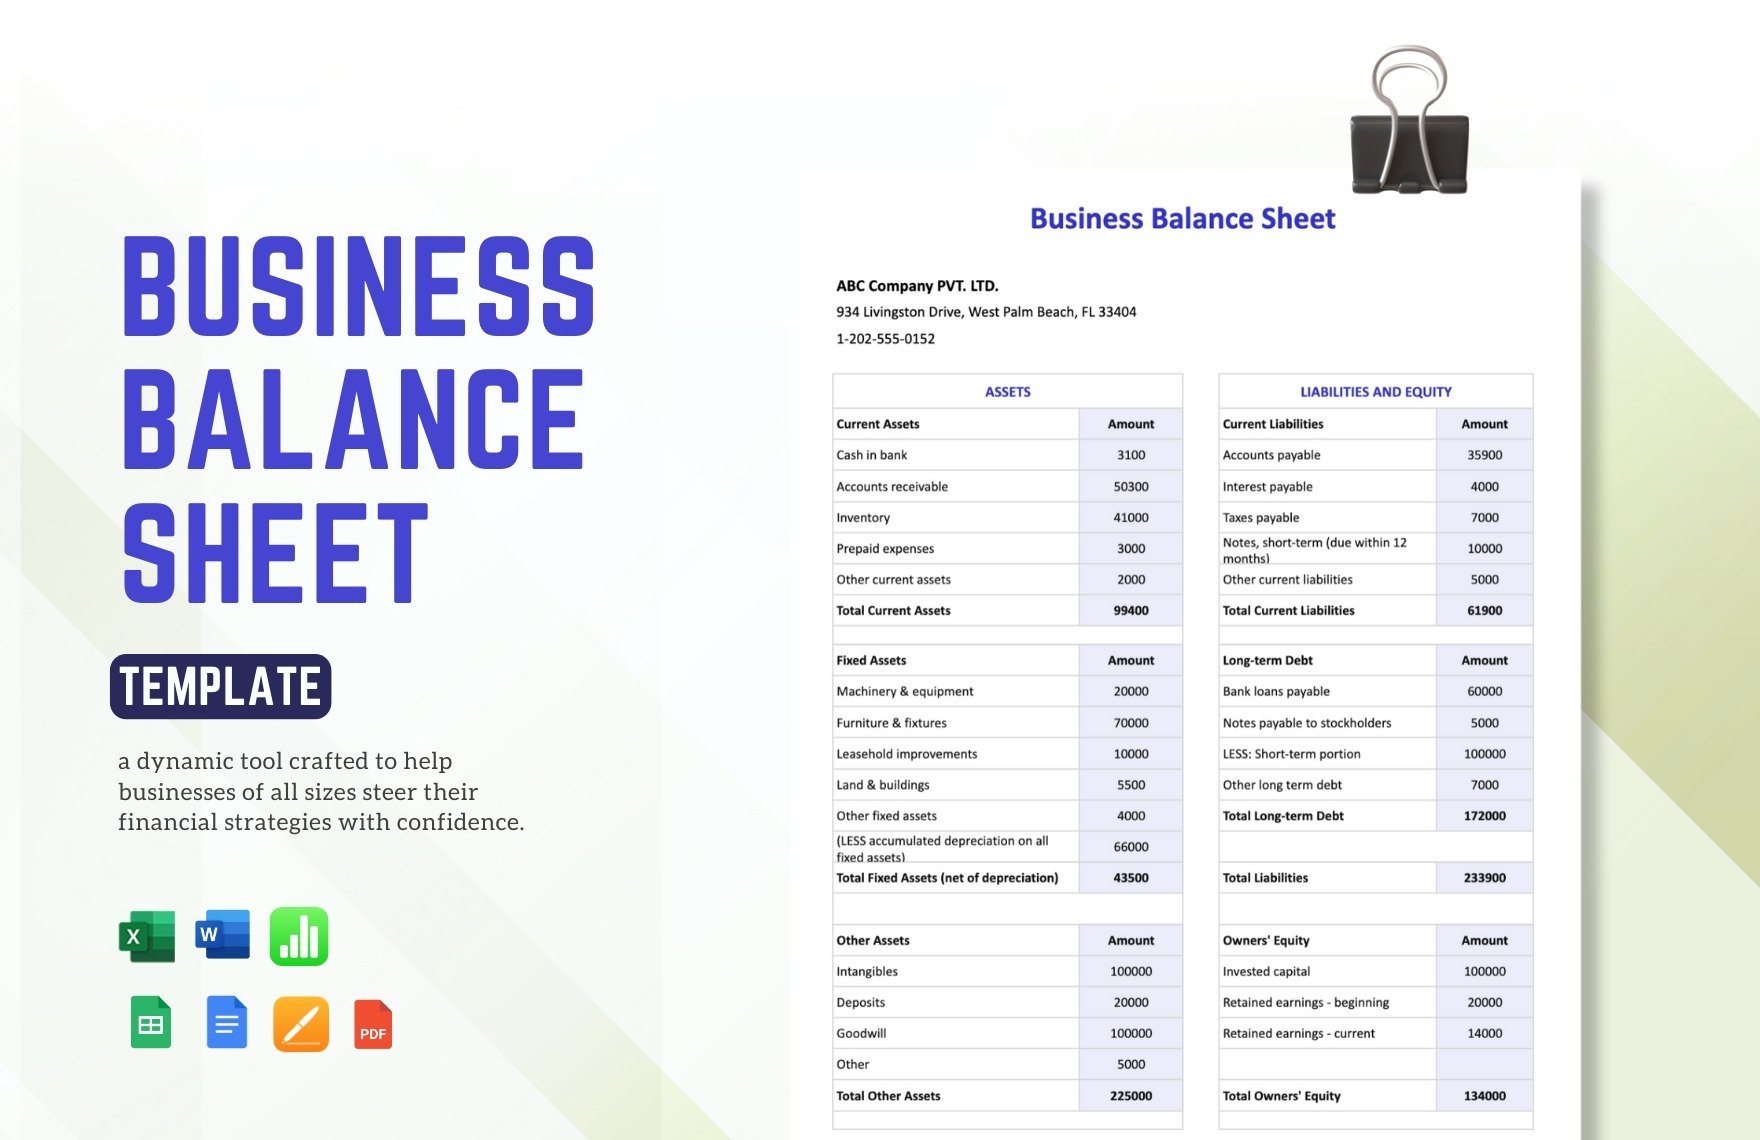 Business Balance Sheet Template in Word, Google Docs, Excel, PDF, Google Sheets, Apple Pages, Apple Numbers